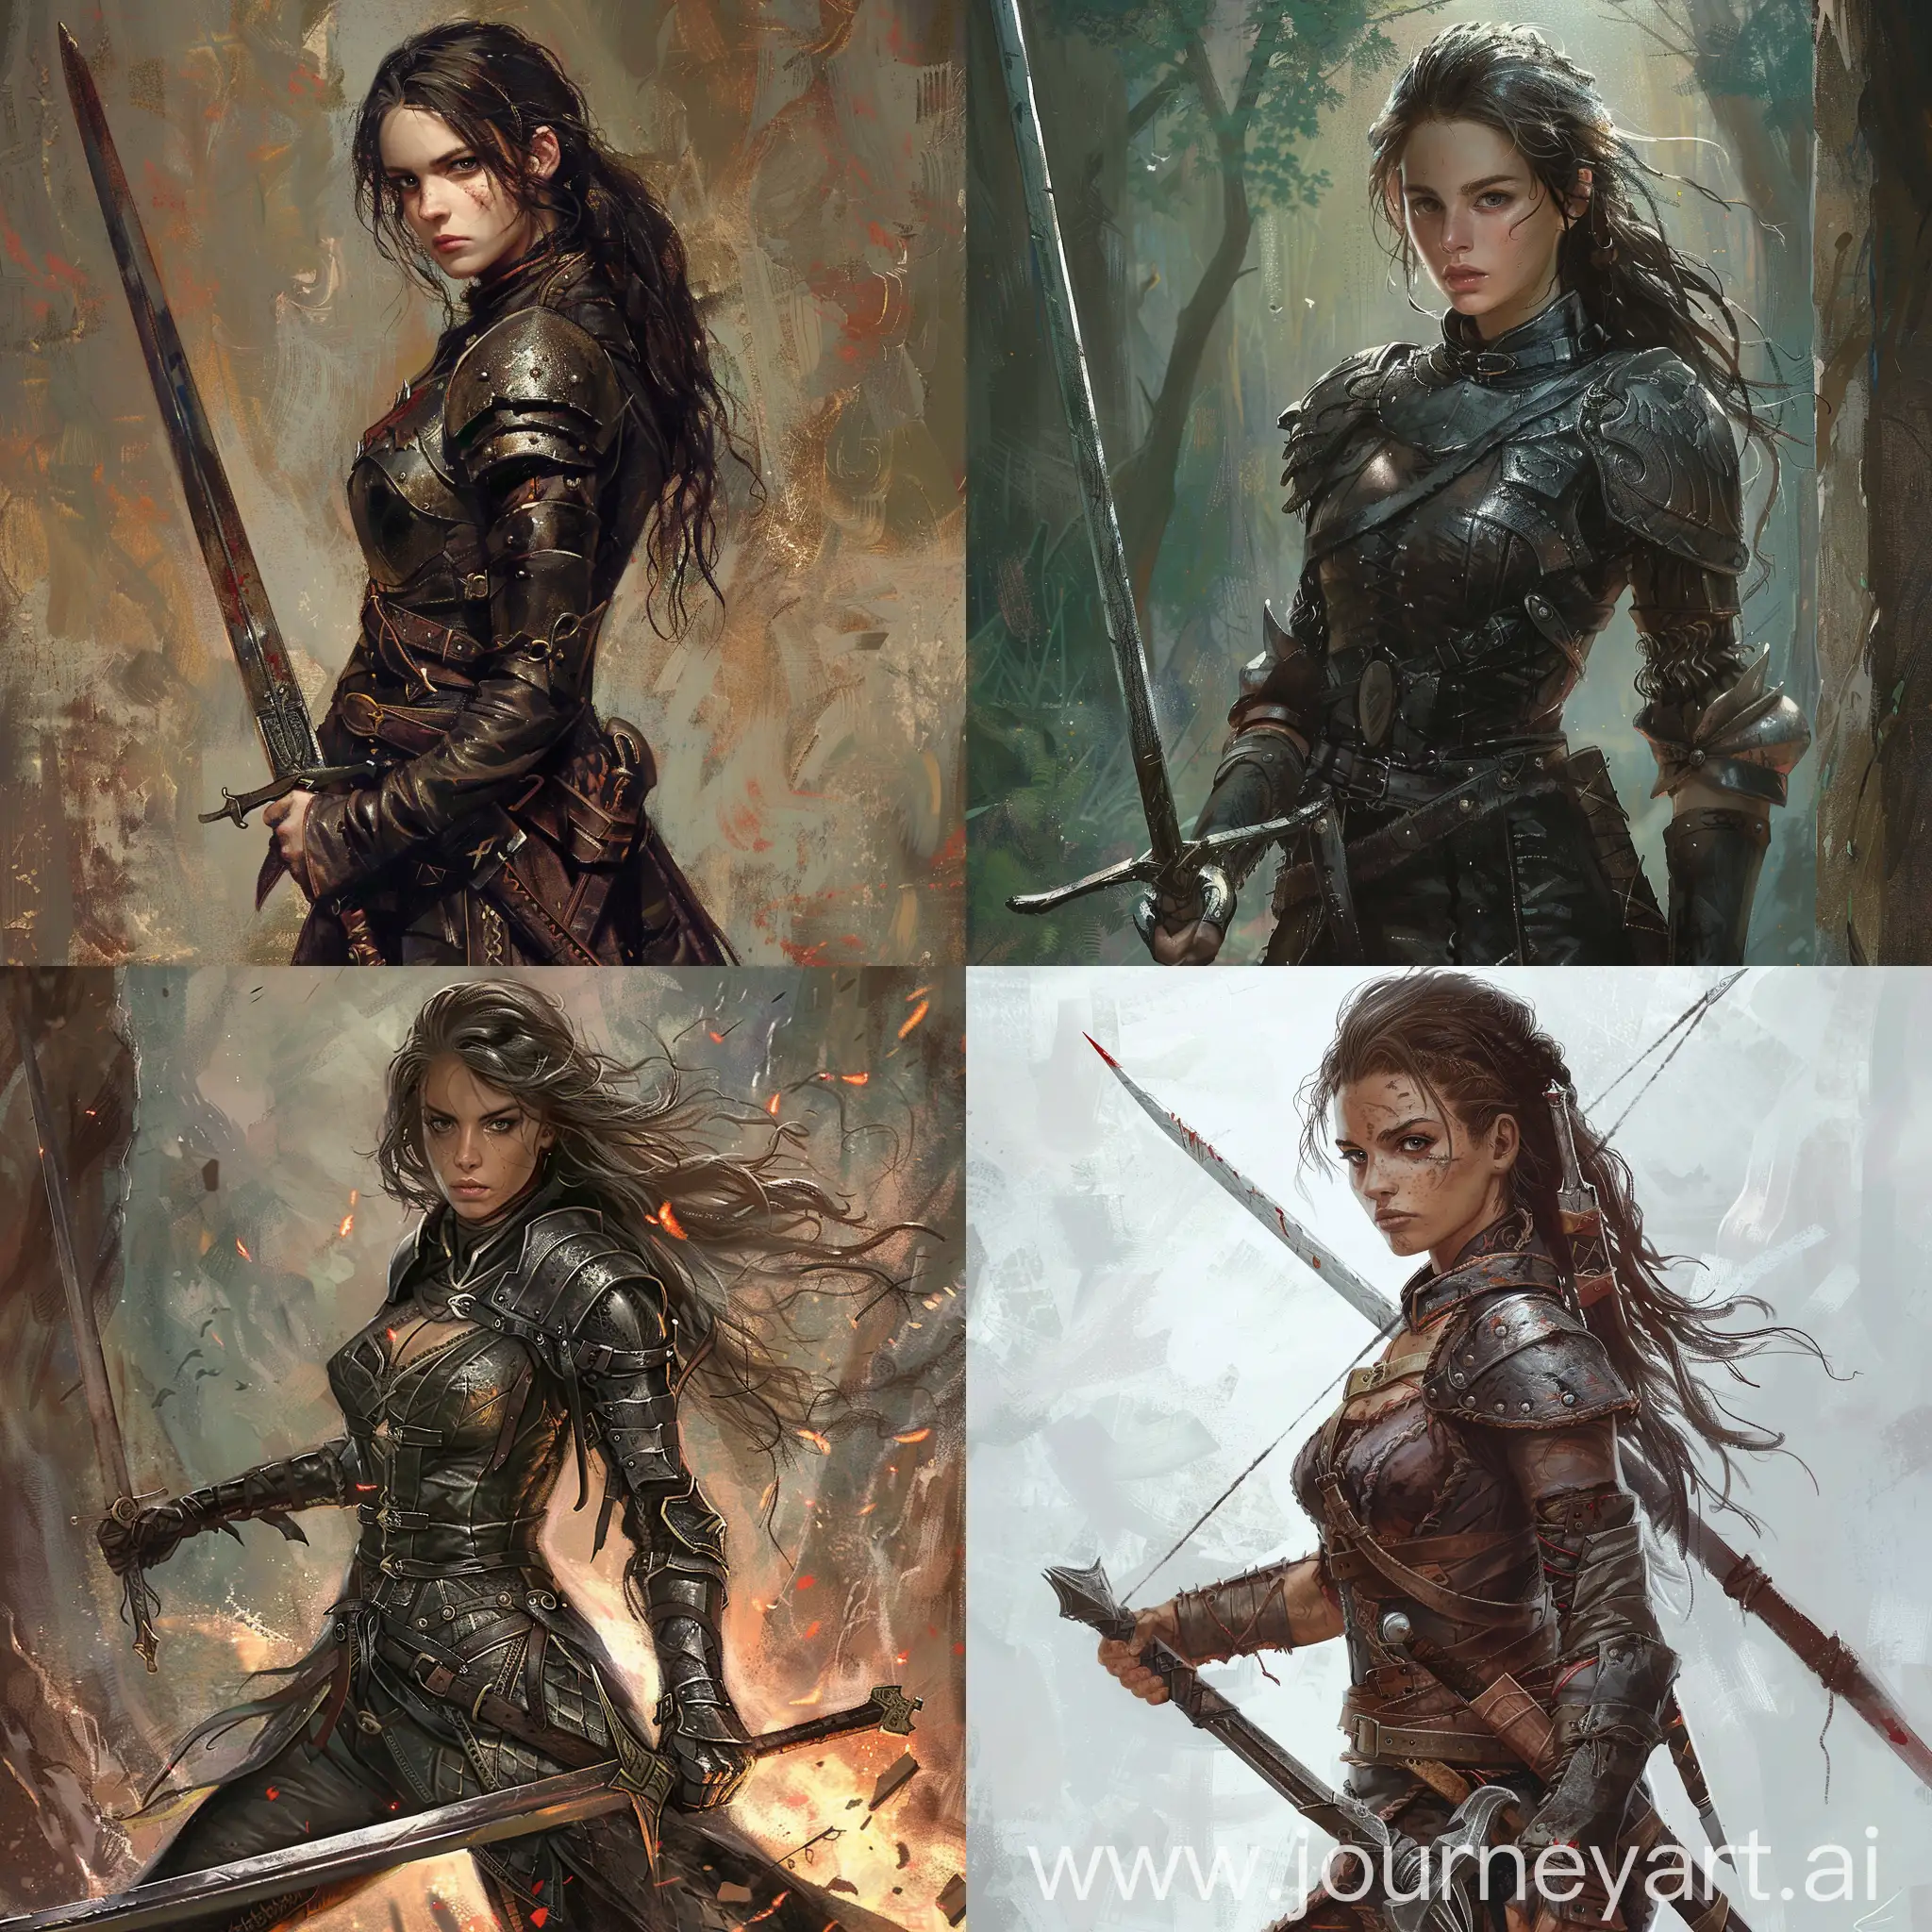 Young-Female-Warrior-in-Leather-Armor-with-Long-Sword-Fantasy-Art